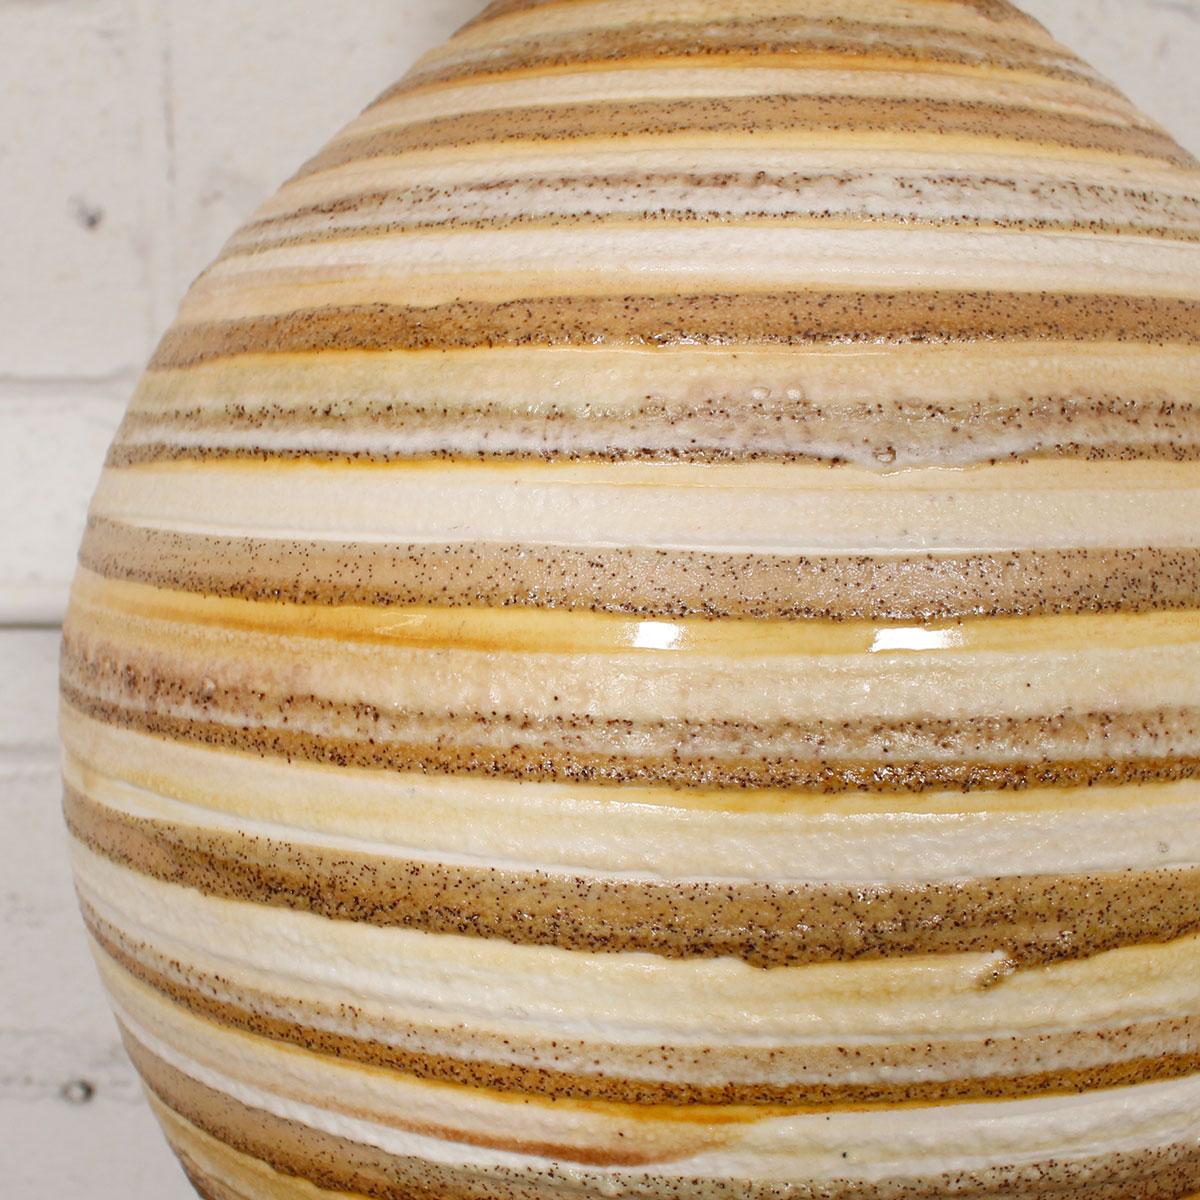 Vintage ‘Beehive’ Striped Lava-Textured Lamp In Excellent Condition For Sale In Kensington, MD